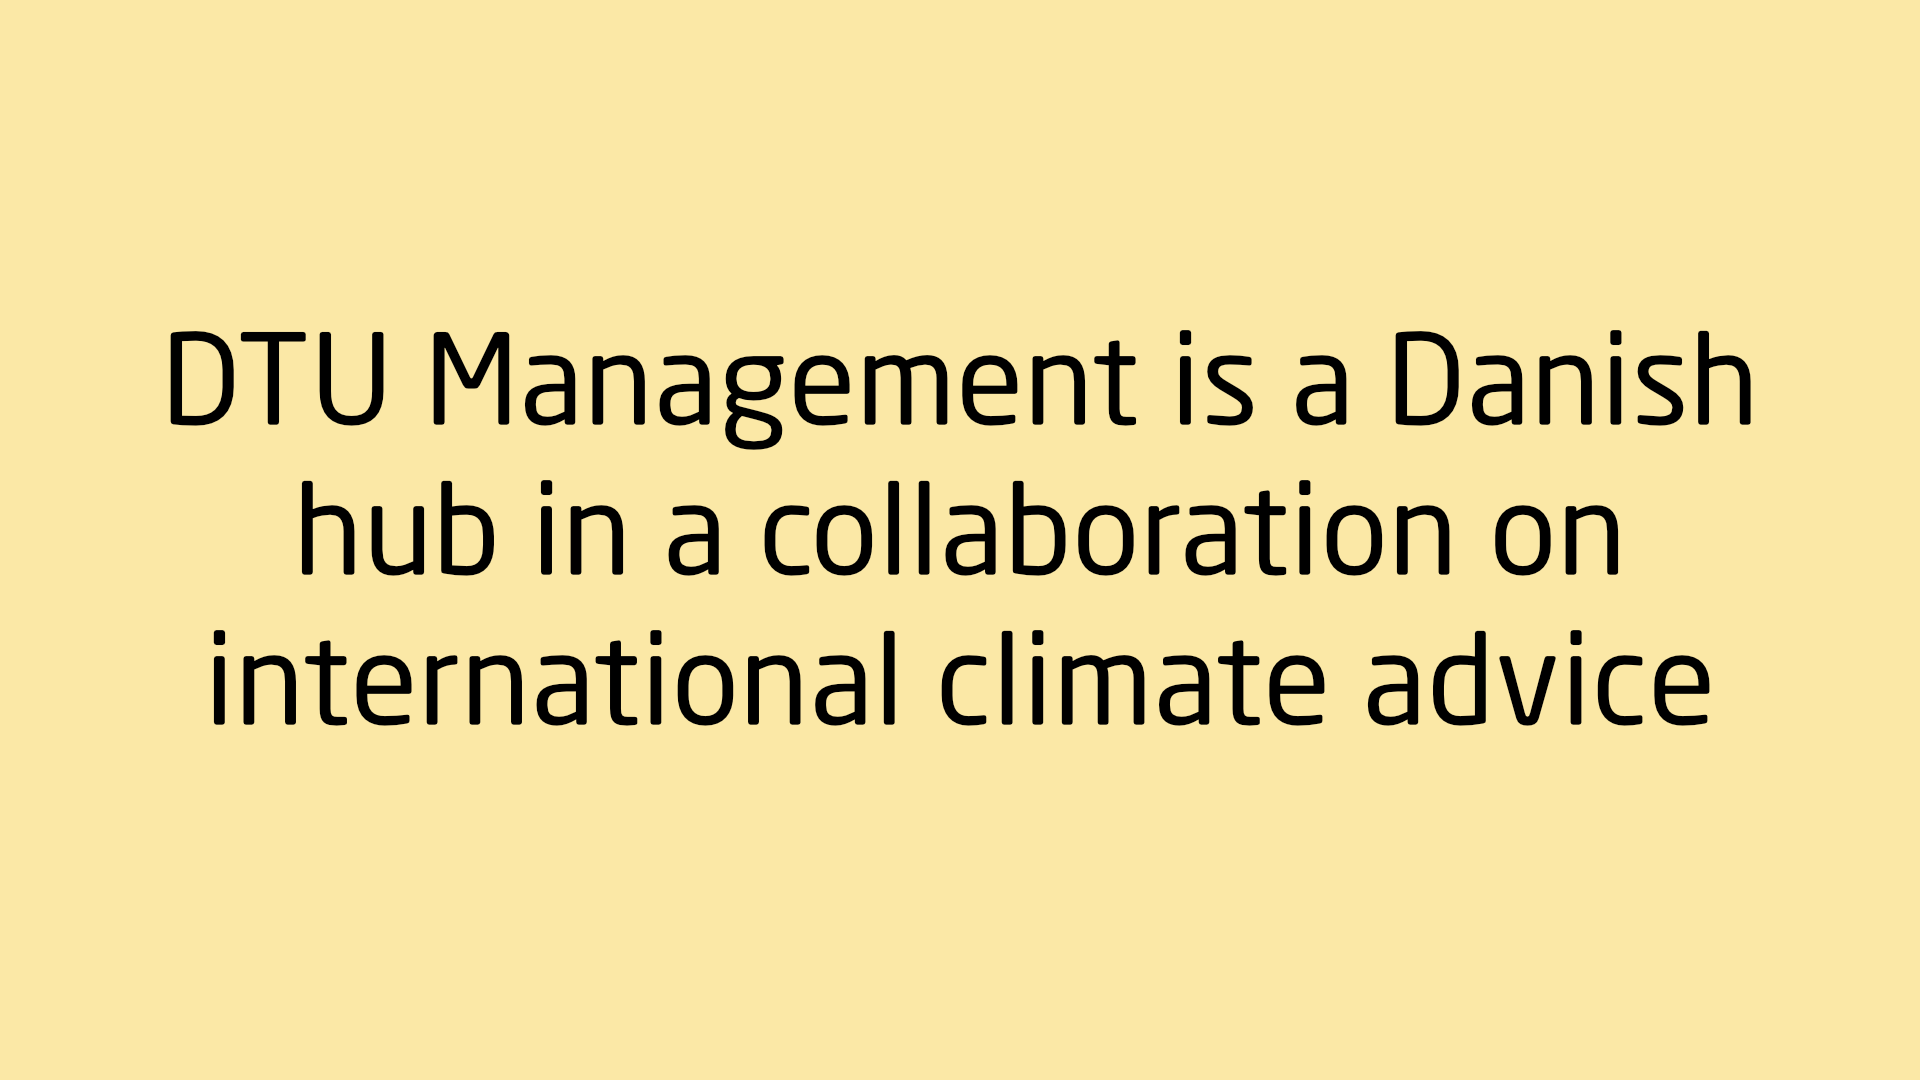 DTU Management participates in a collaboration on international climate advice.